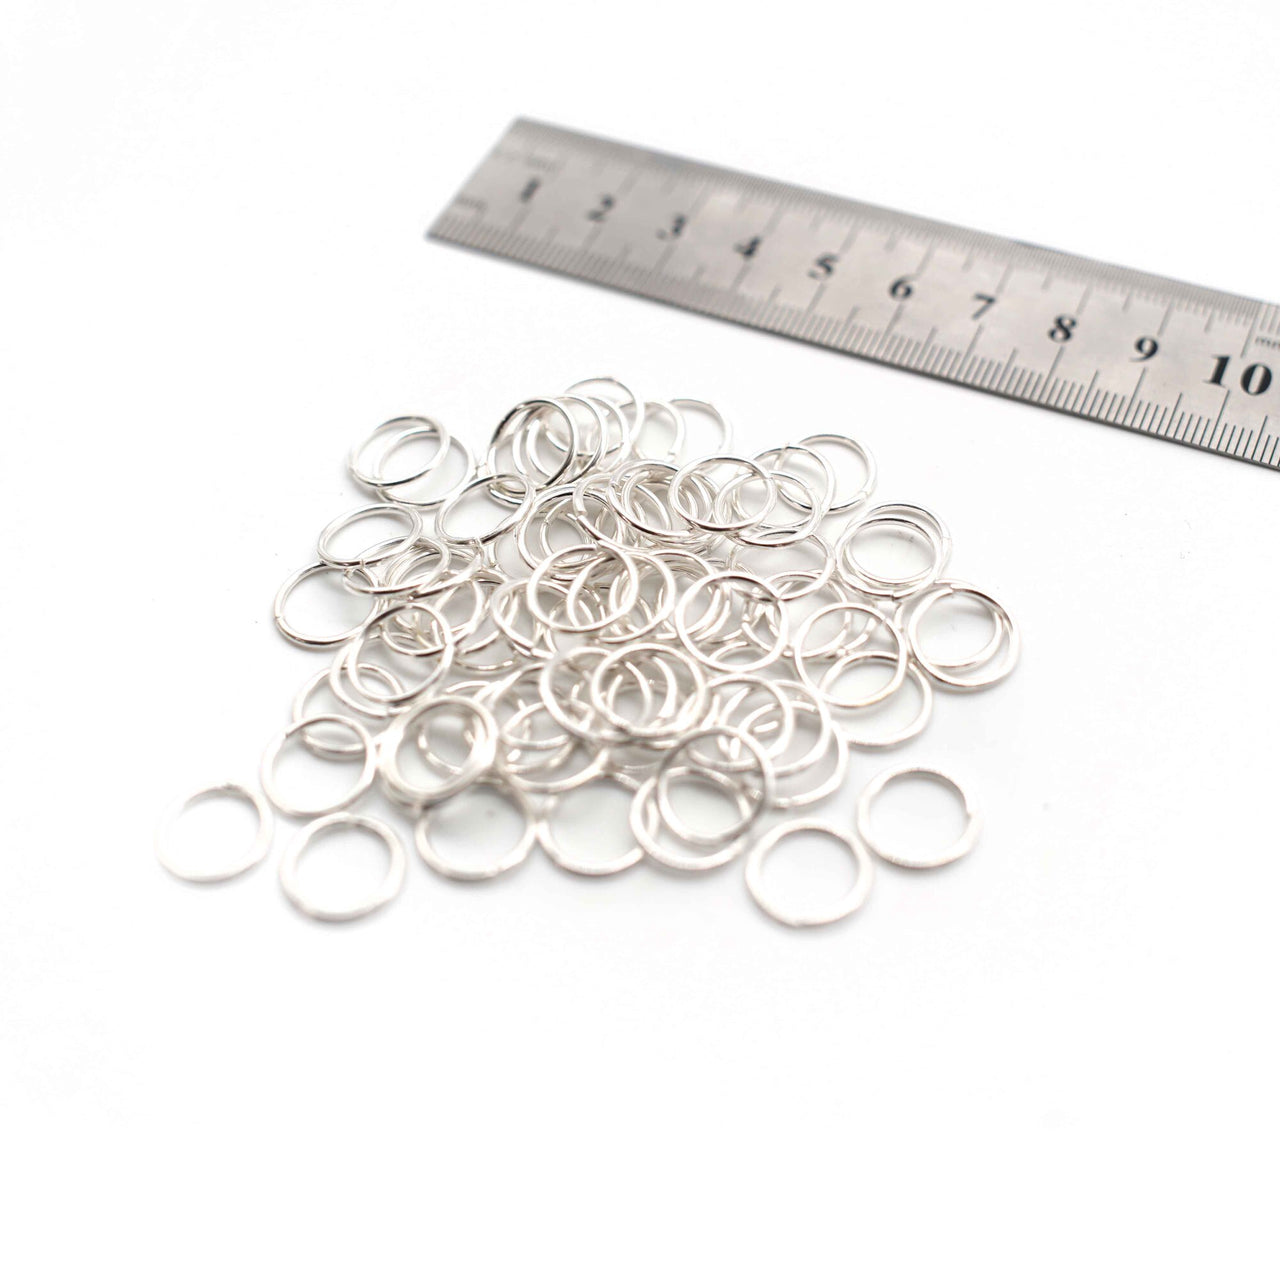 Jump Rings - 12mm - White Silver - 50g (Approx. 175 Rings)